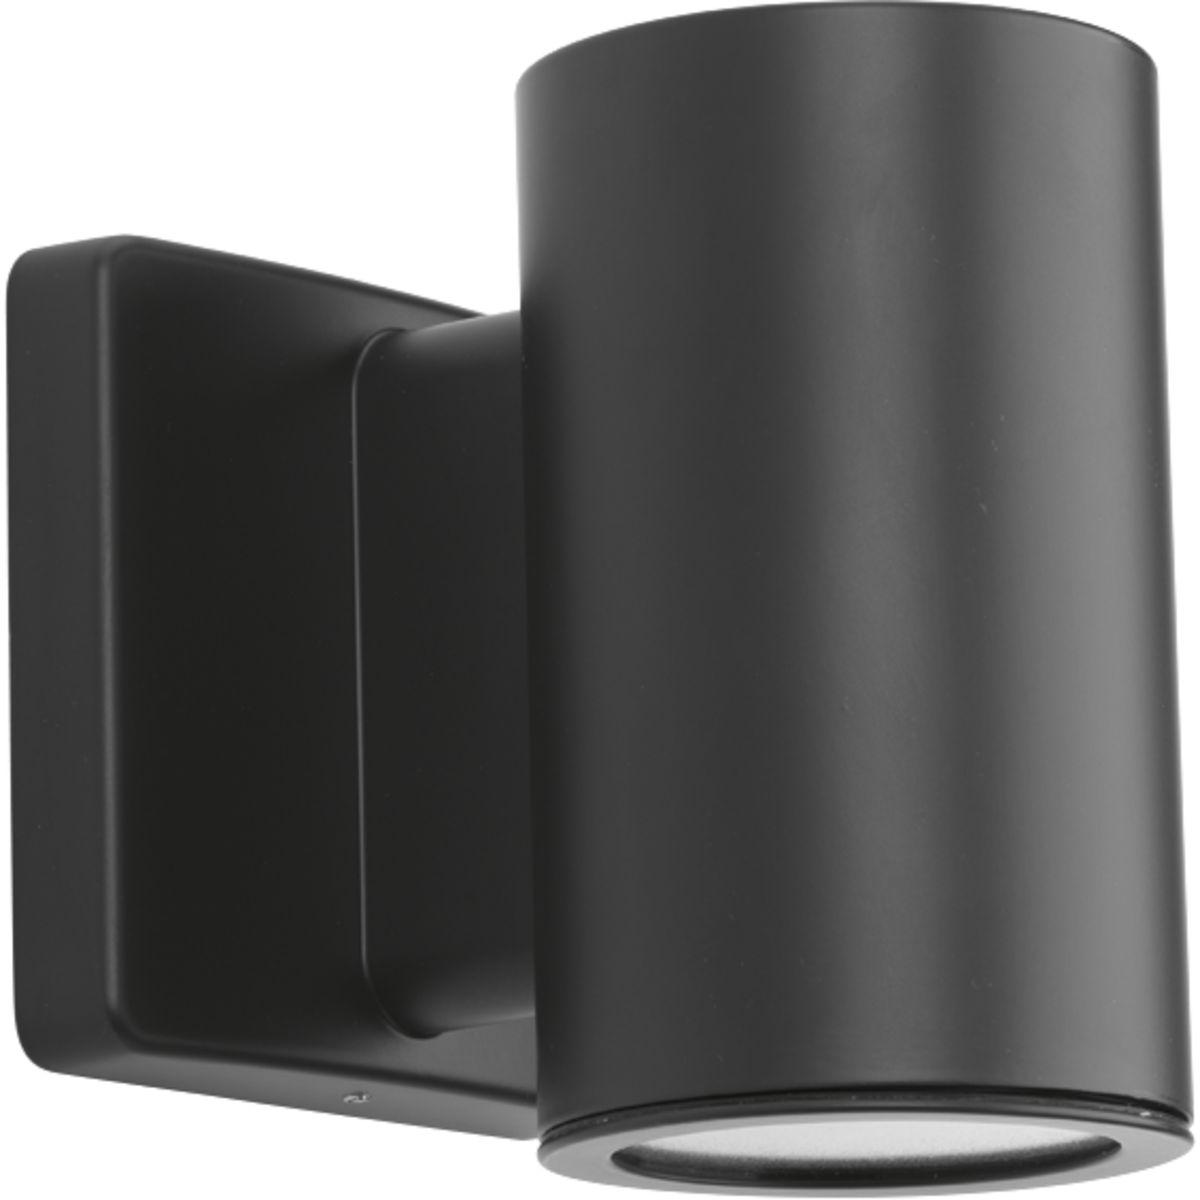 Hubbell P563000-143-30K Sleek, 3" LED cylindrical wall lantern with downlight in elegant Graphite finish.. Die-cast aluminum wall brackets and heavy-duty aluminum framing. Fade and chip-resistant. UL listed for wet locations. Can be used indoor or outdoor.  ; 3" LED wall mount d